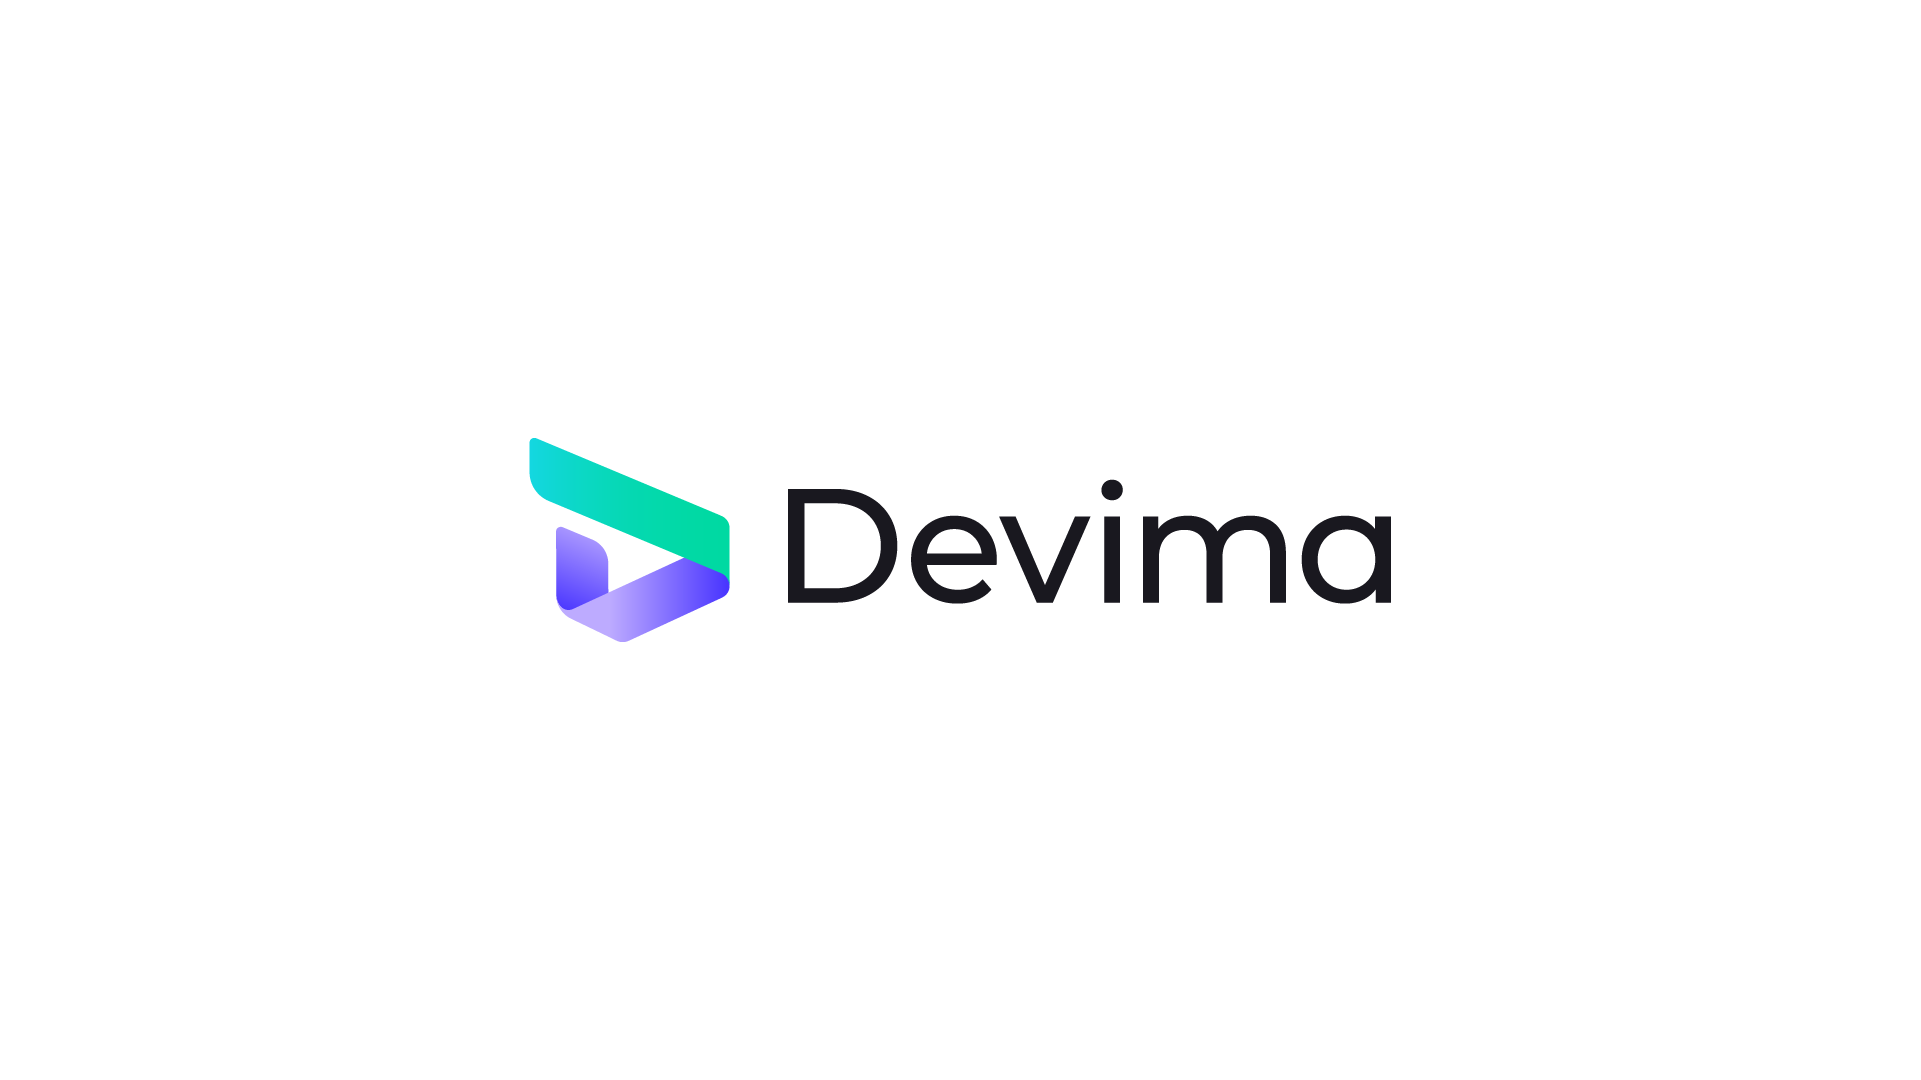 Devima - Software Development Company logo, abstract letter 'D' with foldable elements, symbolizing dynamic and innovative software solutions